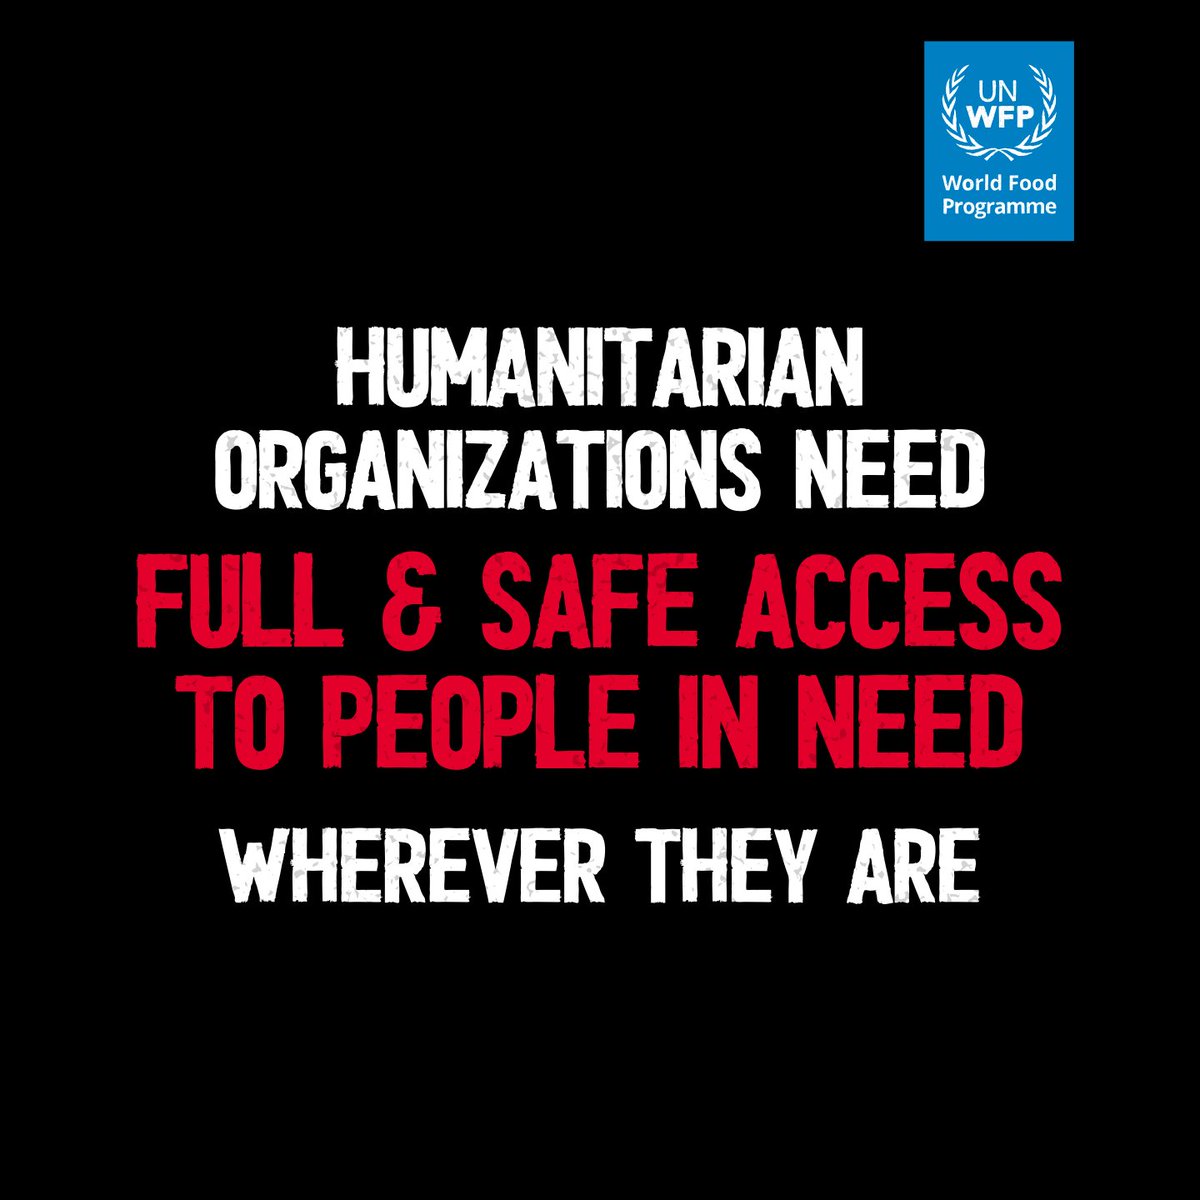 🛎️ Access to food is a human right. Humanitarian organizations must have unhindered access to people in need wherever they are.